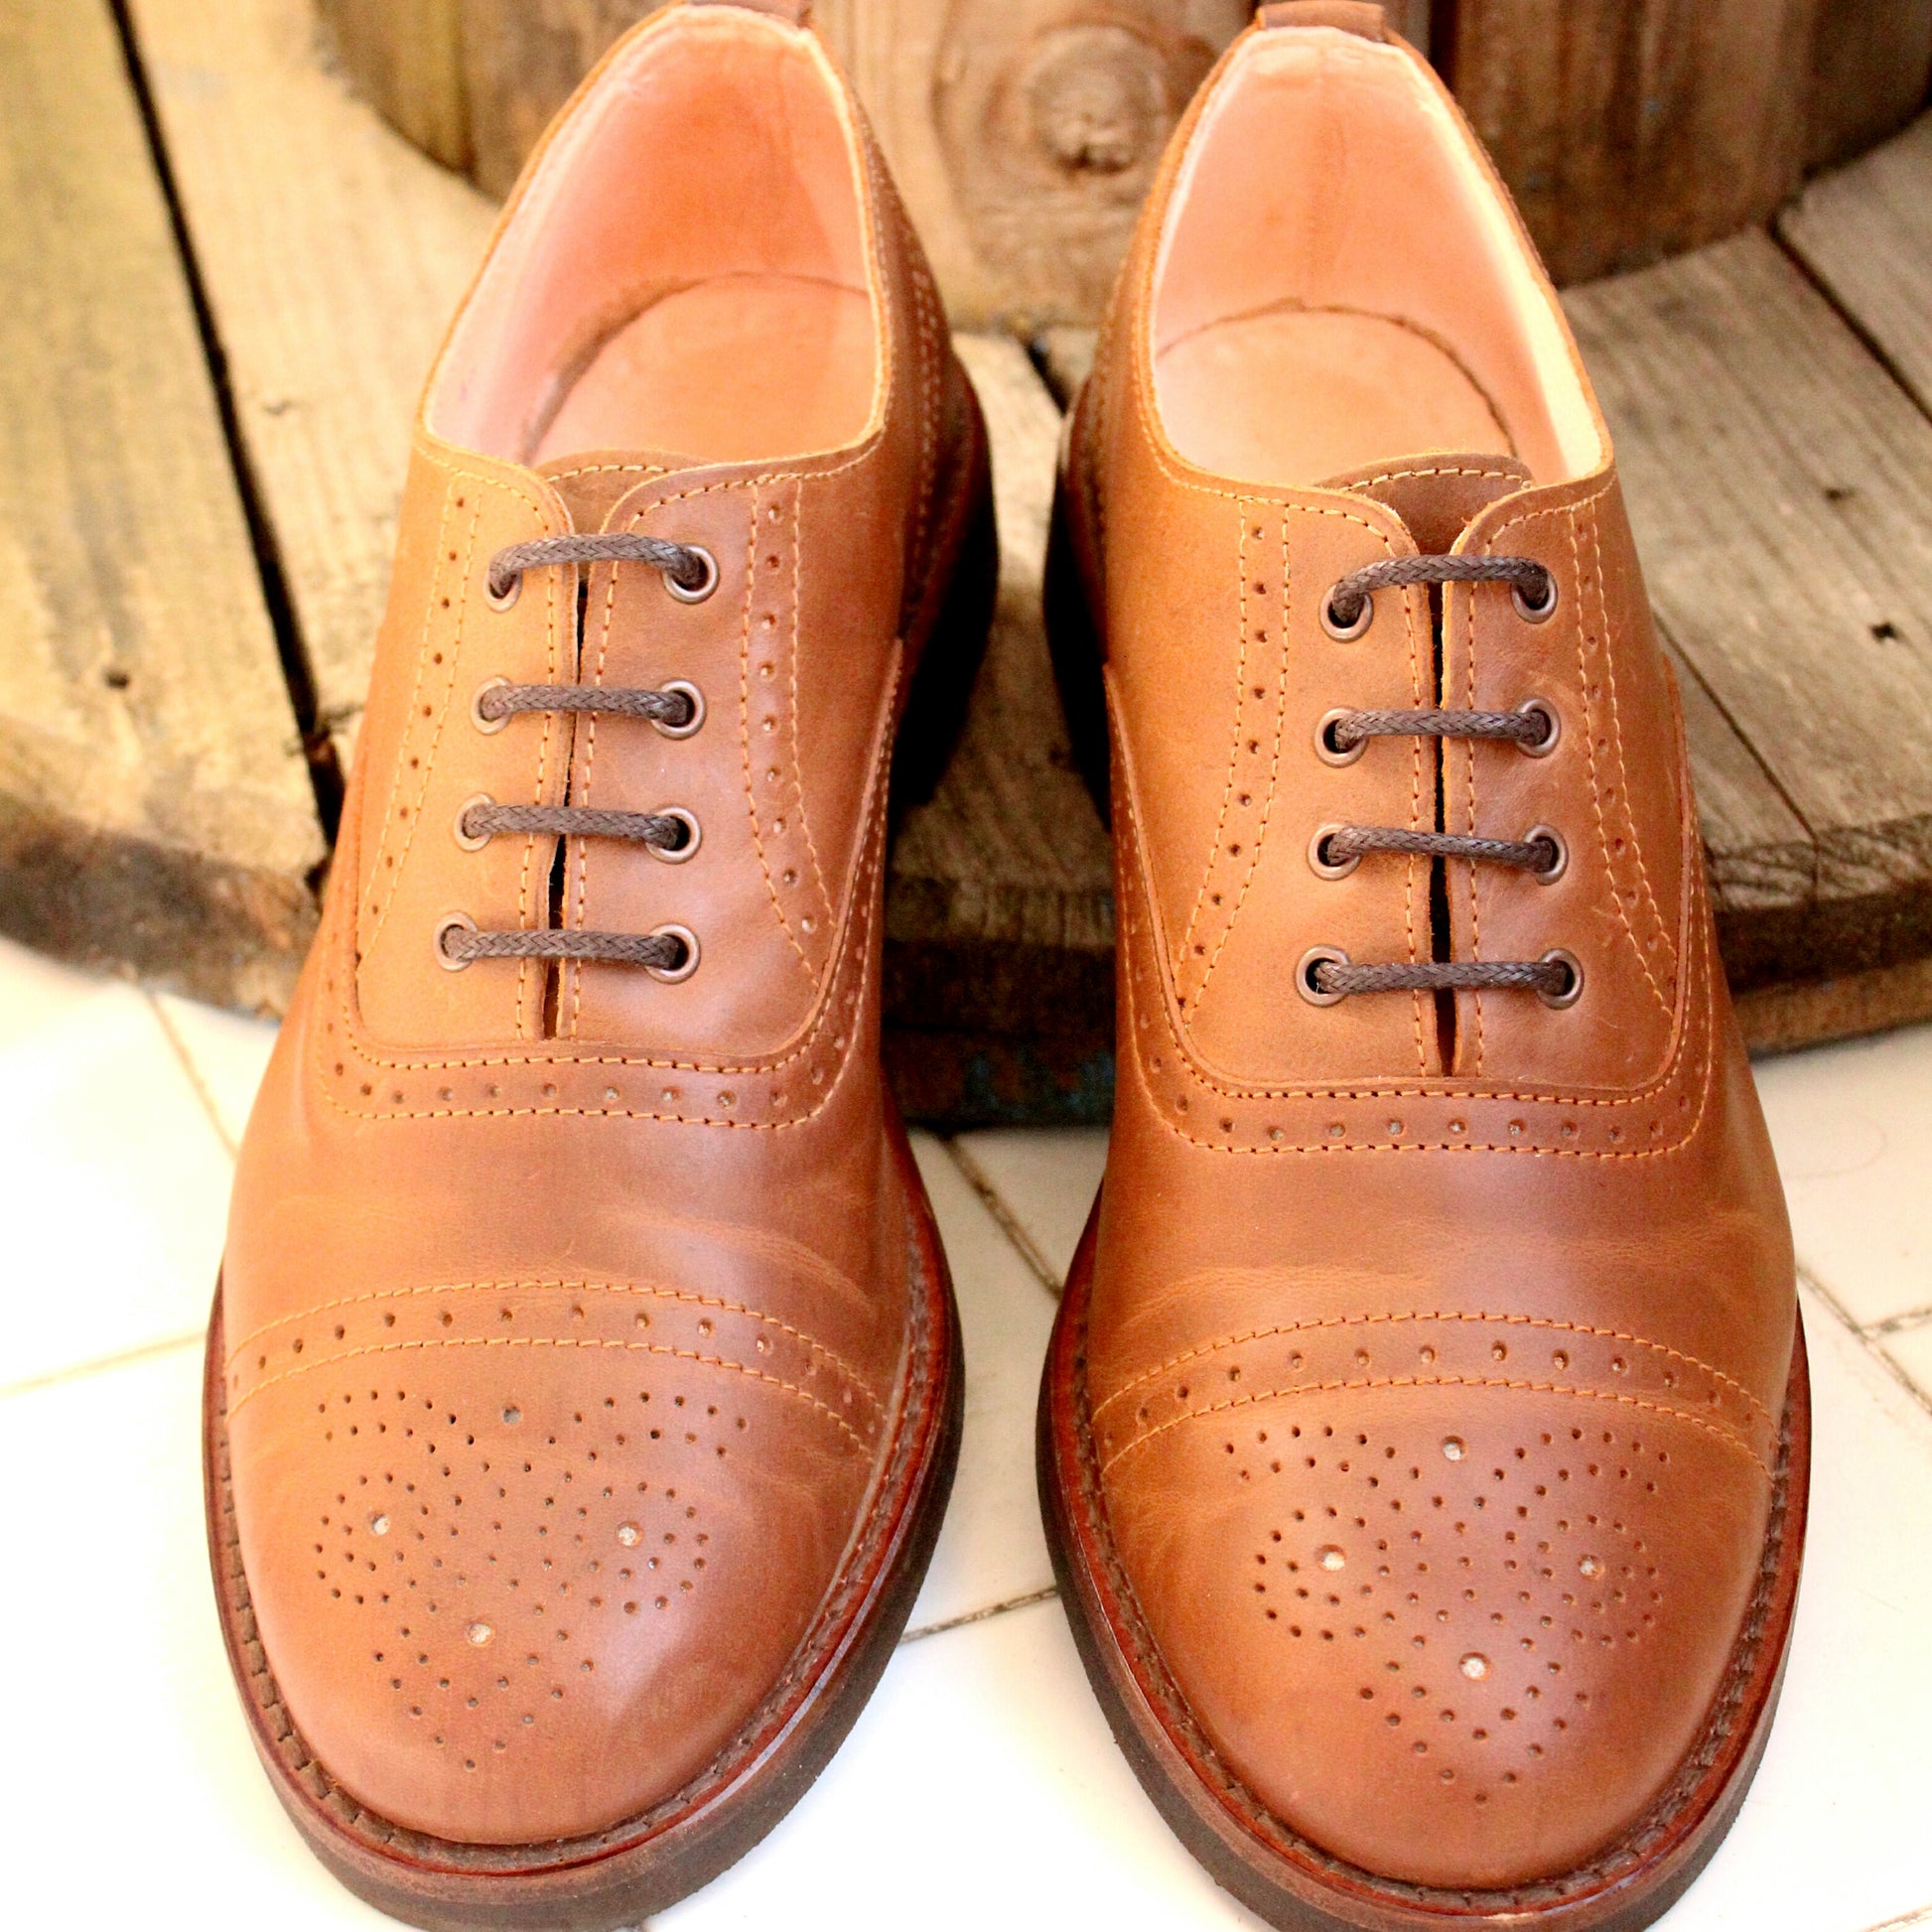 Minho - Man Shoes, Men Lether Shoes, Vintage Shoes, Men Shoes – OldMulla -  Boots Store, Handmade By George Family